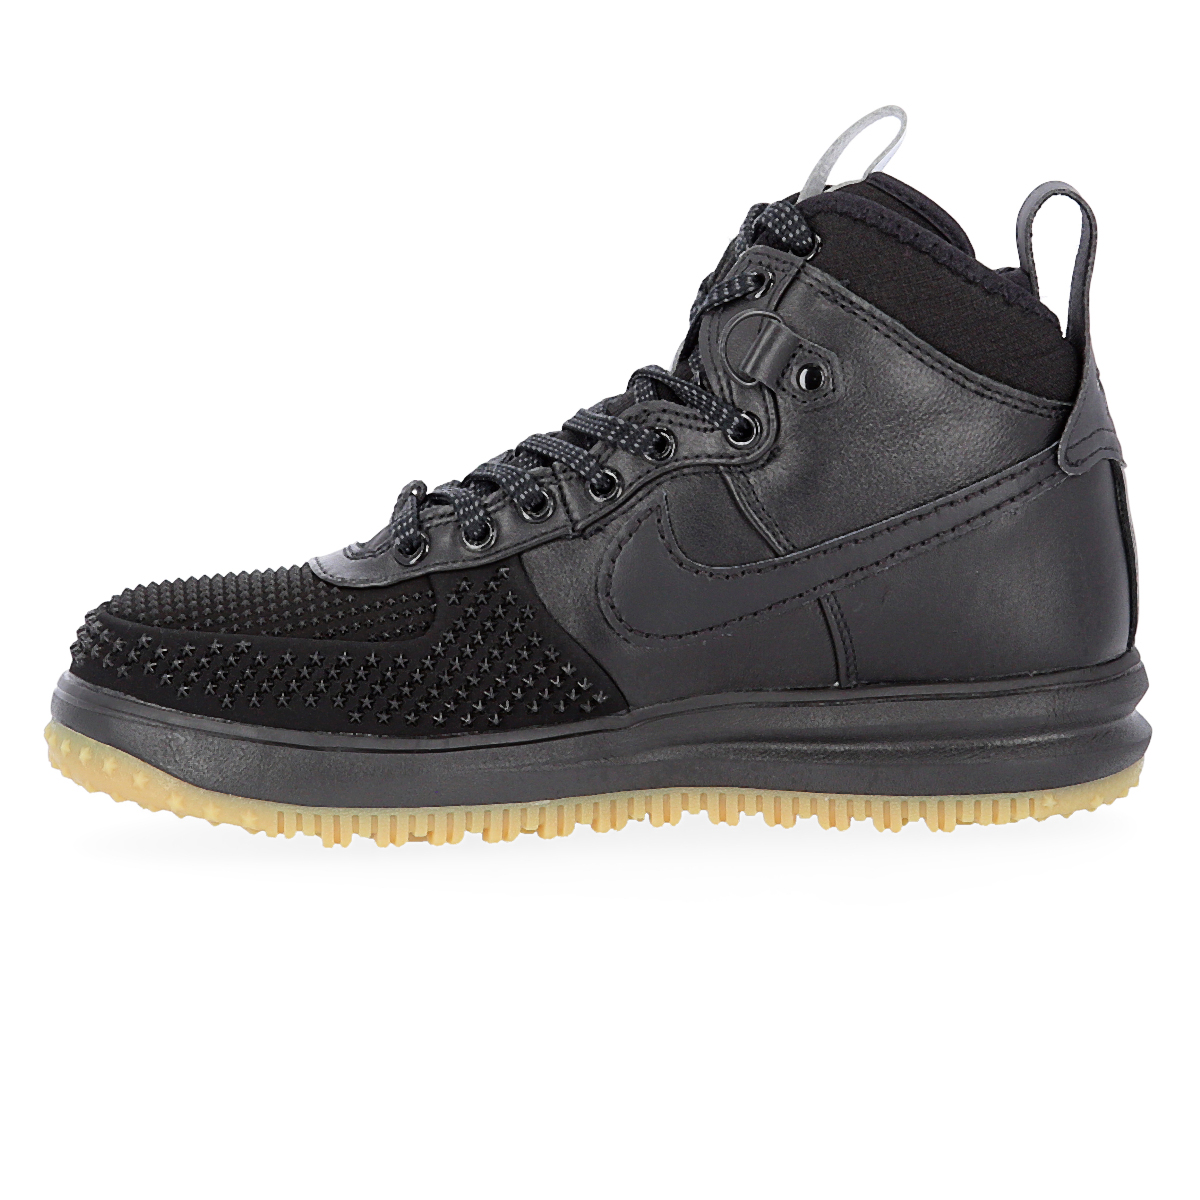 Zapatillas Urbanas Nike Lunar Force 1 Hombre,  image number null